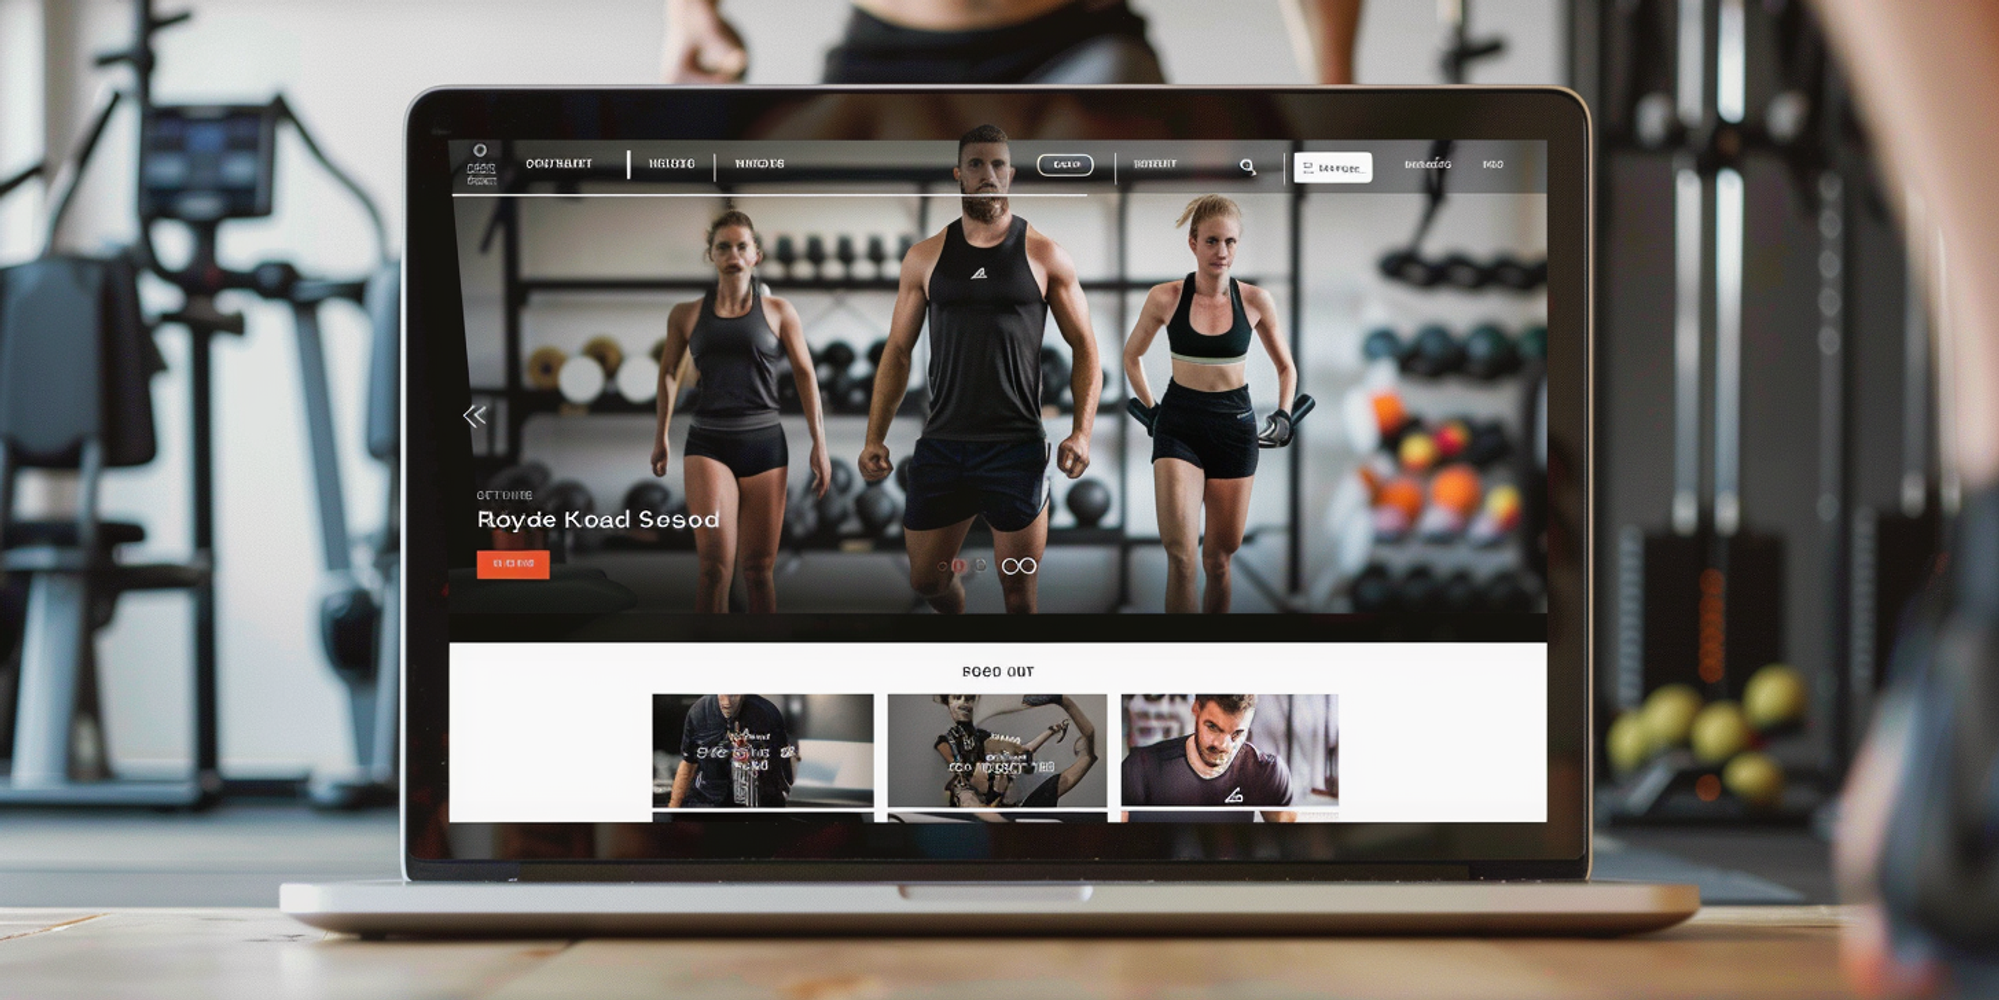 Cover Image for Mindbody vs Glofox - Which Is Best for Fitness Business Owners?